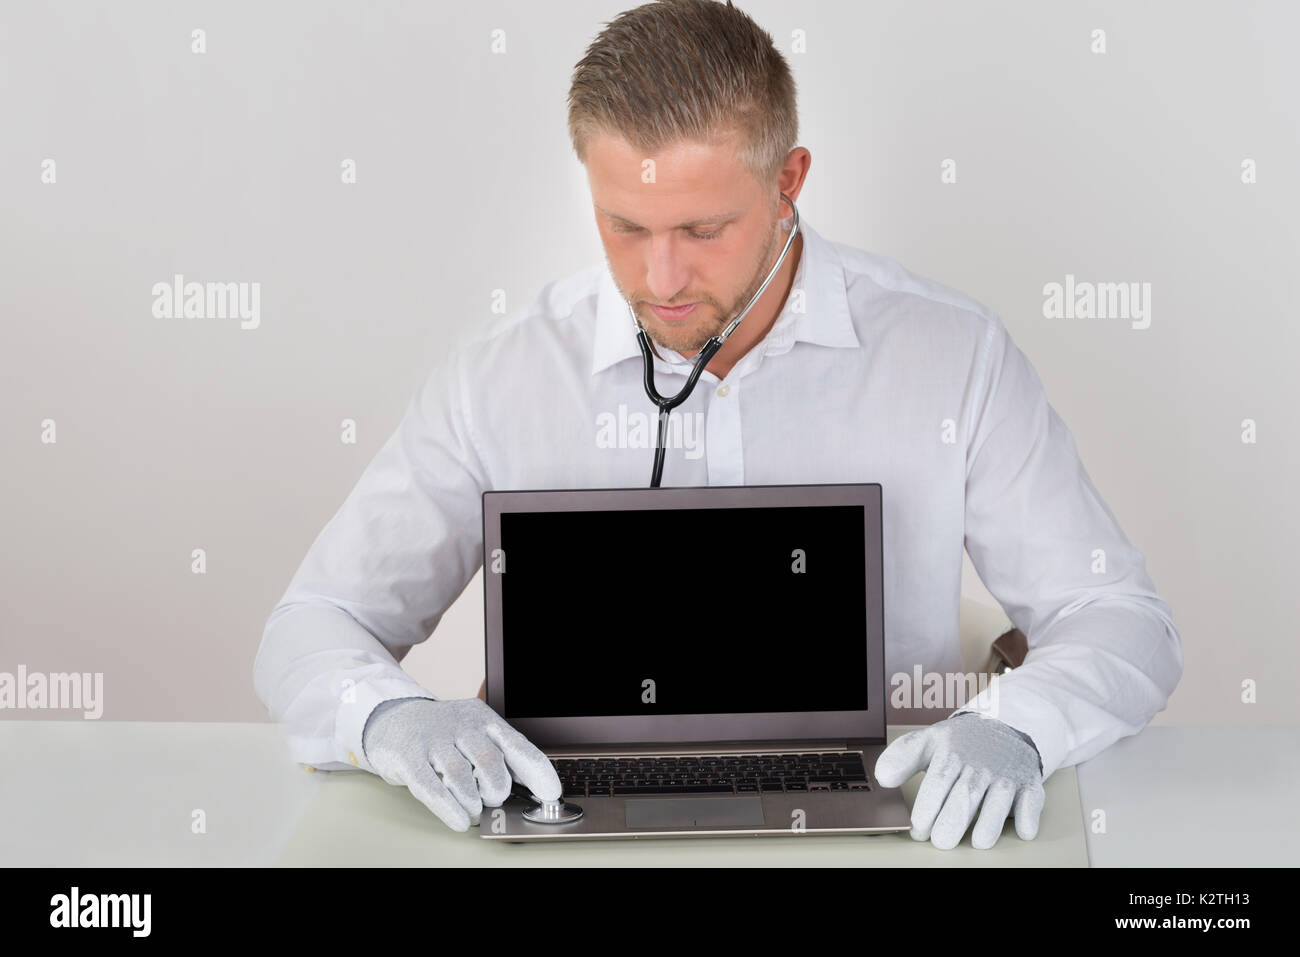 Young Male Technician Examining Laptop With Stethoscope At Desk Stock Photo